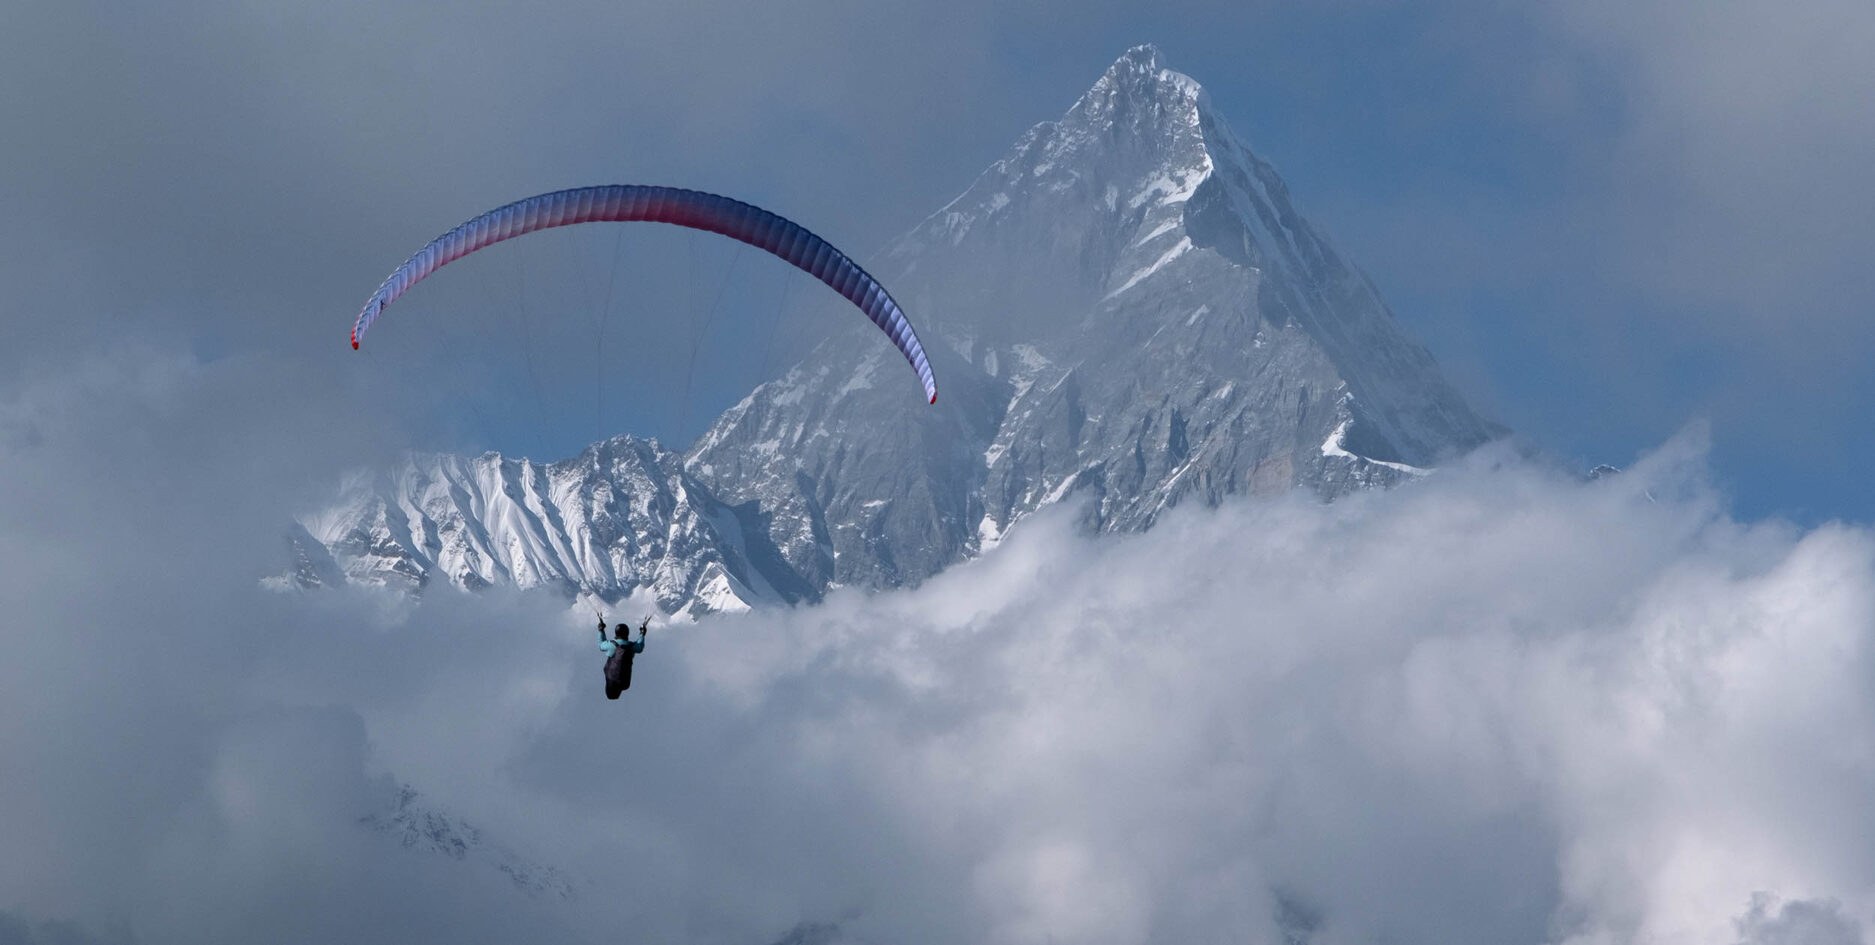 Paragliding with the new Ozone Swift 6 in Nepal. Photo: Olivier Laugero